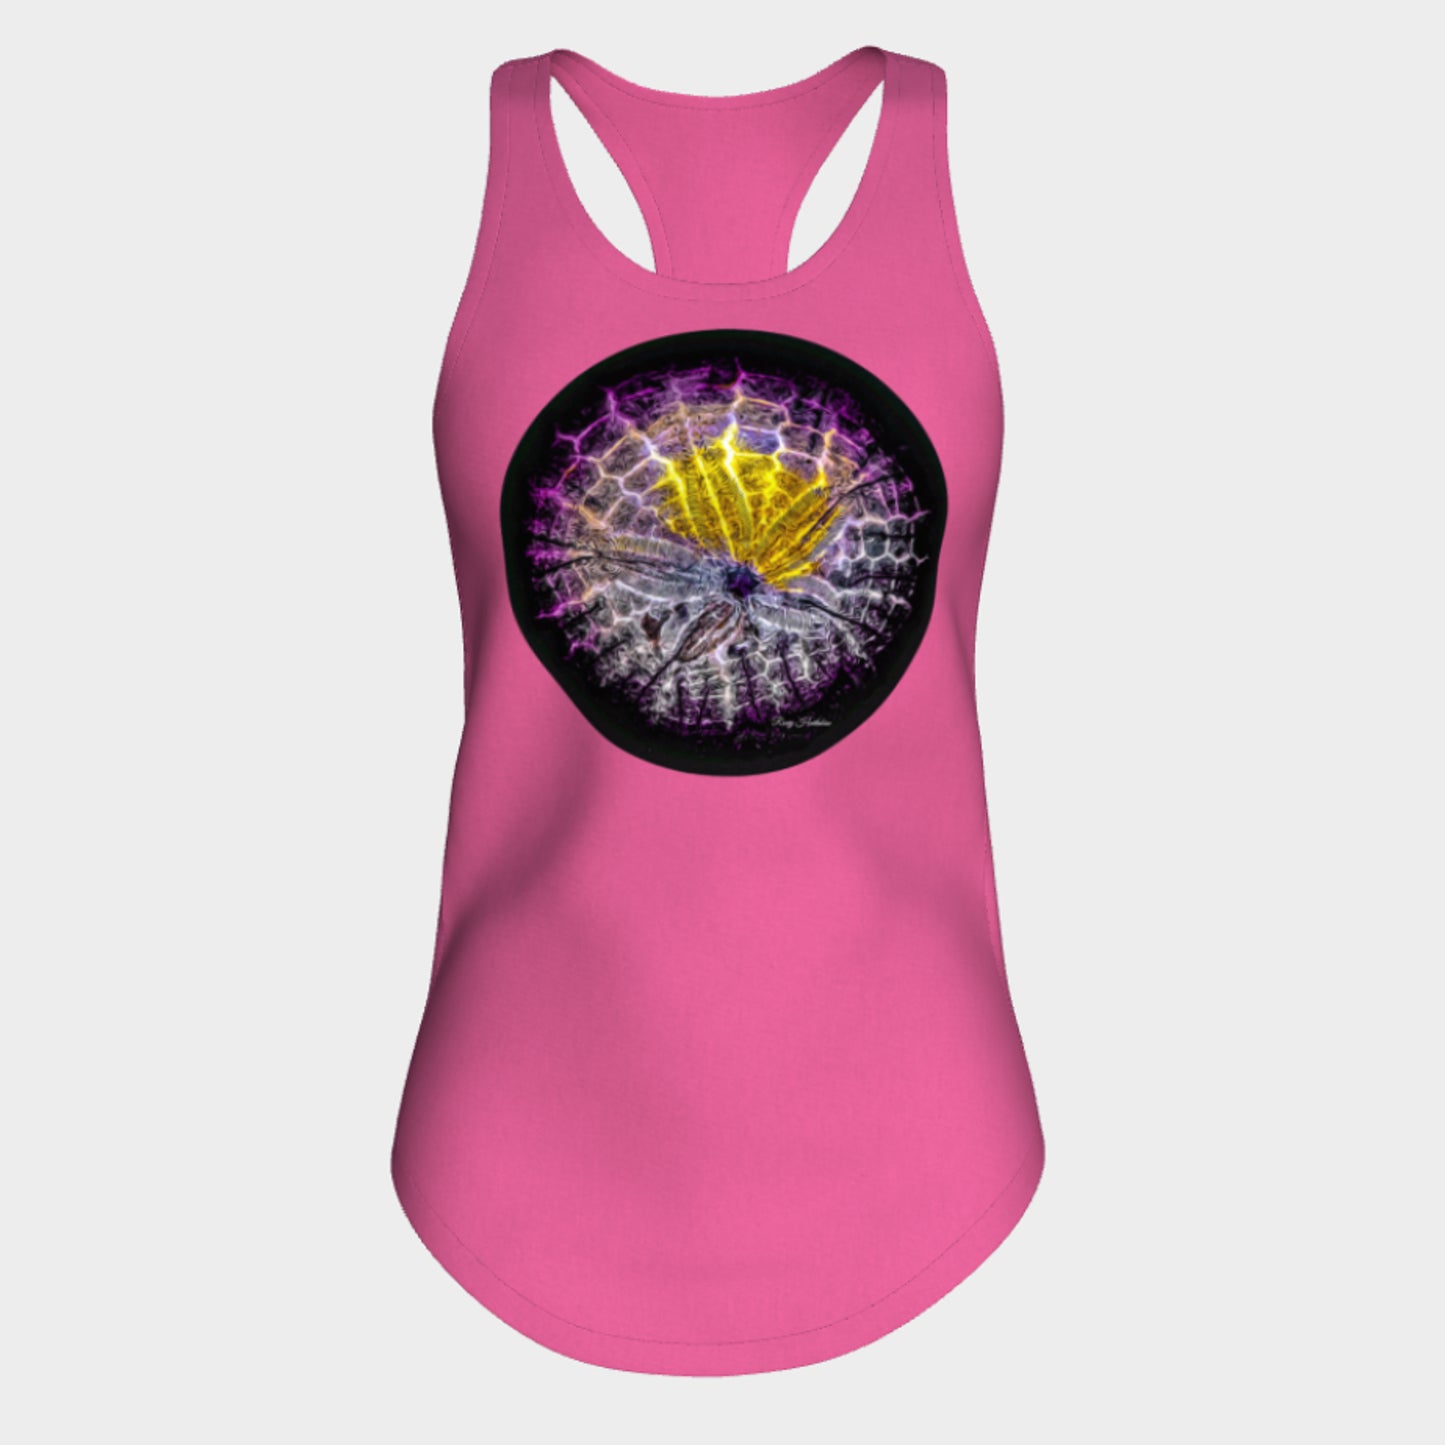 Spotlight Sand Dollar Racerback Tank Top  Excellent choice for the summer or for working out.   Made from 60% spun cotton and 40% poly for a mix of comfort and performance, you get it all (including my photography and digital art) with this custom printed racerback tank top.   Van Isle Goddess Next Level racerback tank top will quickly become you go-to tank top because of the super comfy fit!